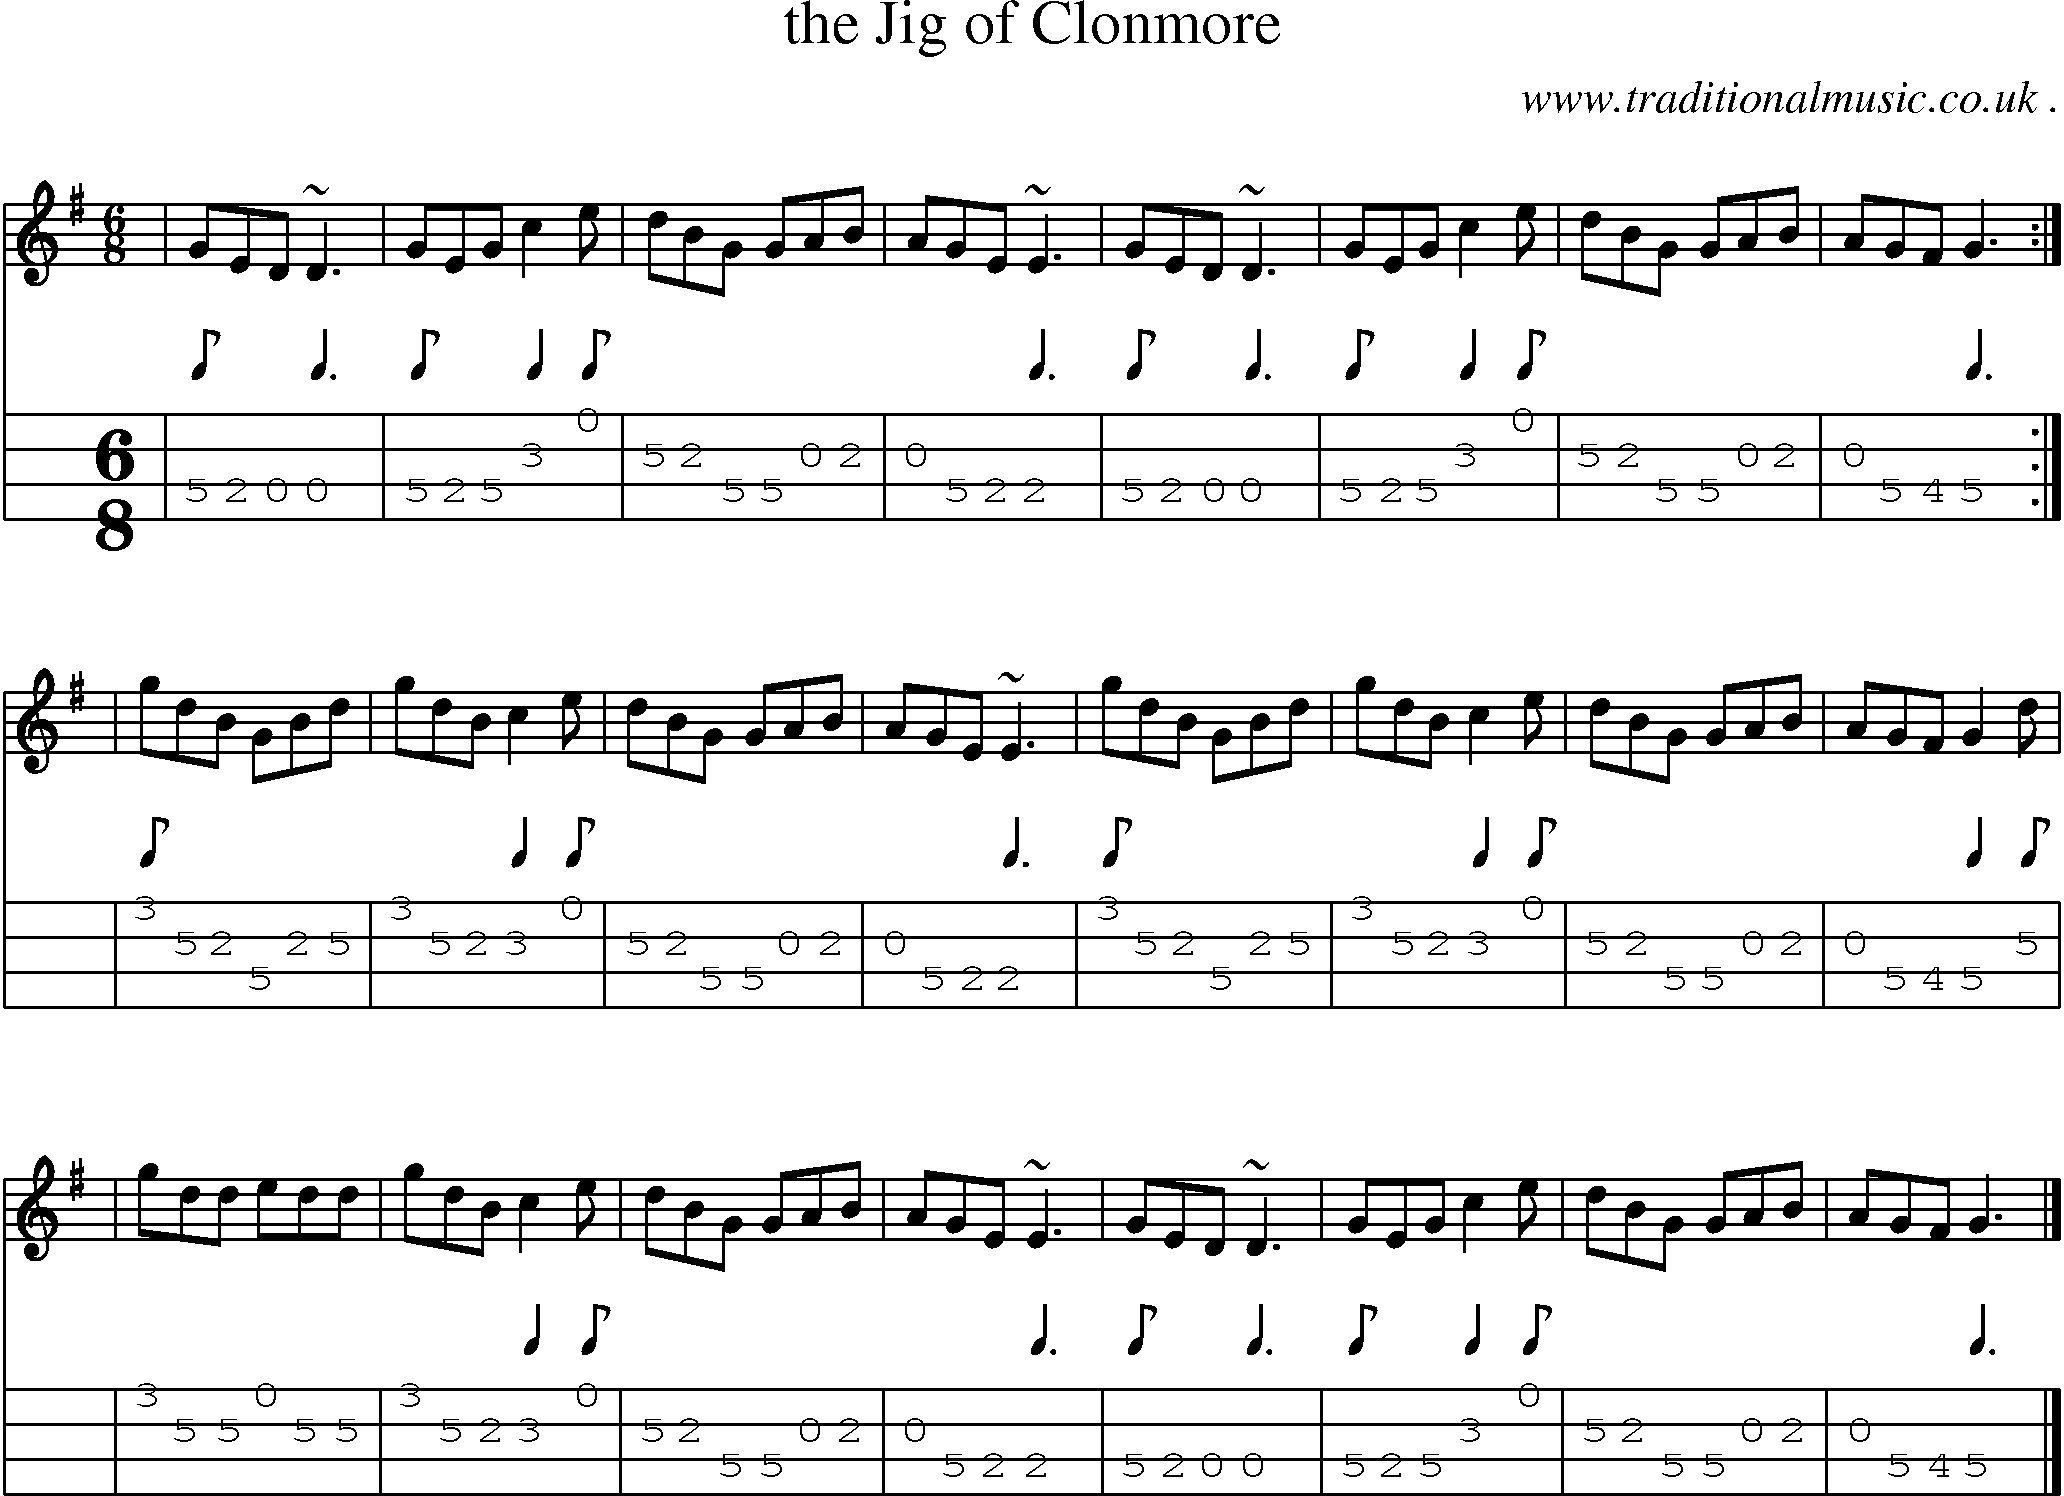 Sheet-music  score, Chords and Mandolin Tabs for The Jig Of Clonmore